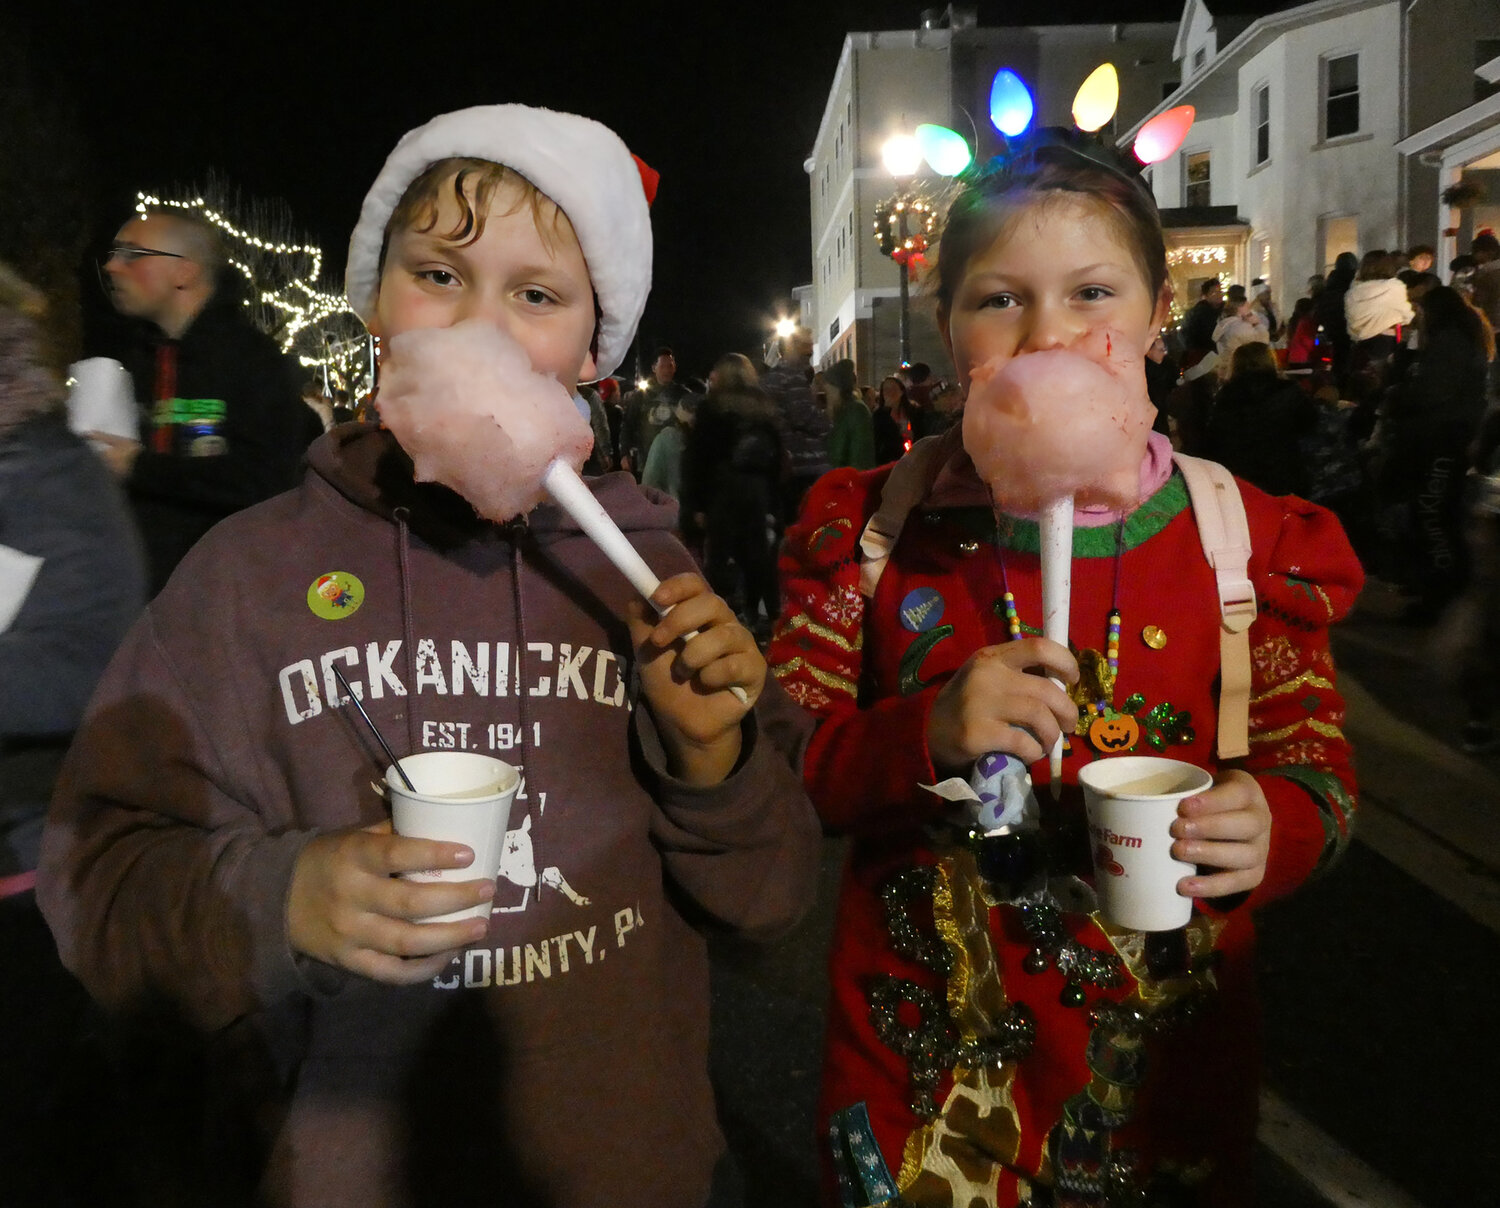 Owen and Abby McDonnell enjoy the cotton candy at Saturday’s holiday event in Perkasie.